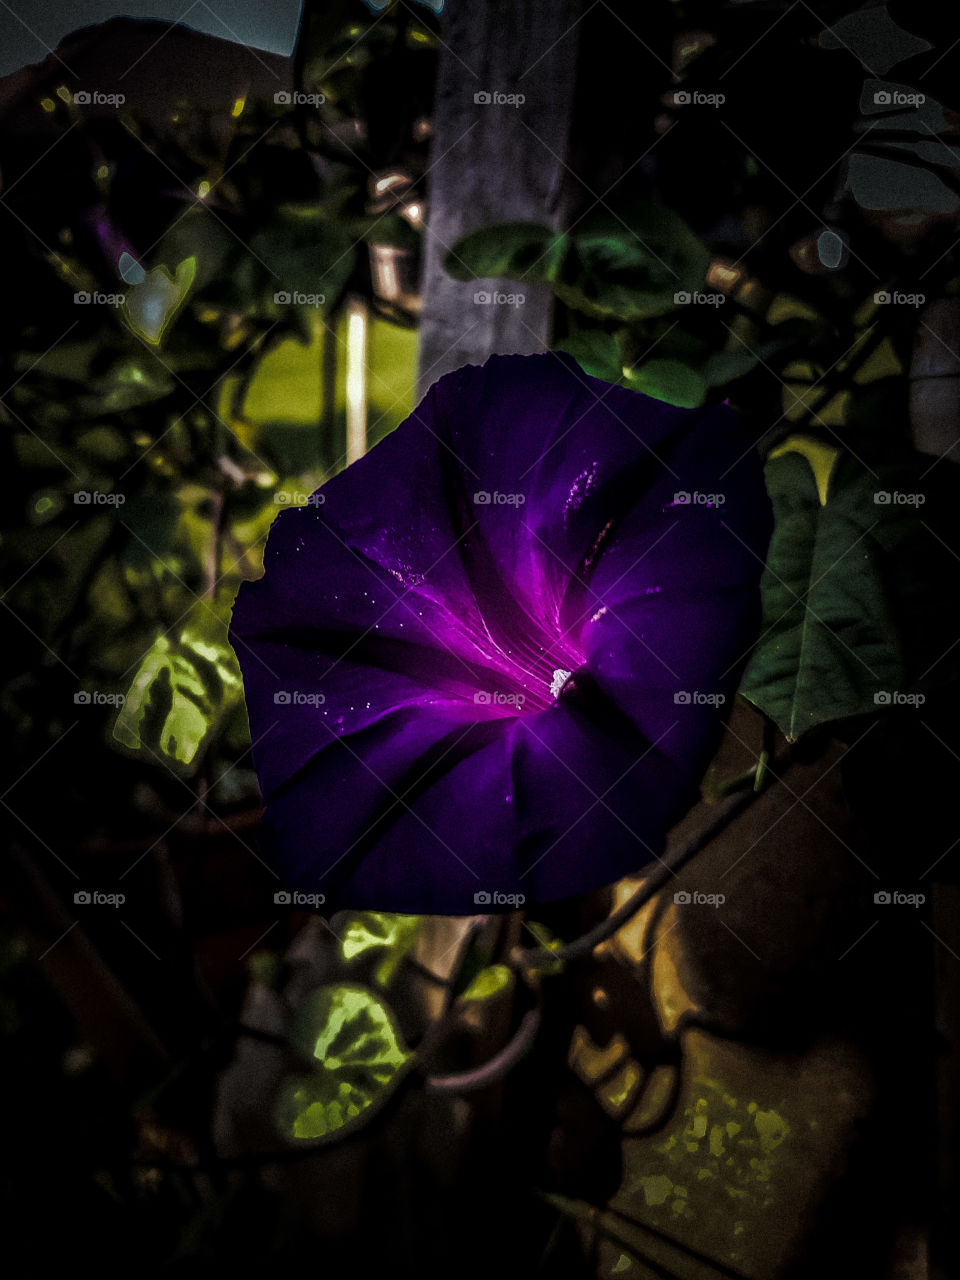 This one I was just having fun with. Such a beautiful flower! Purple petunias.